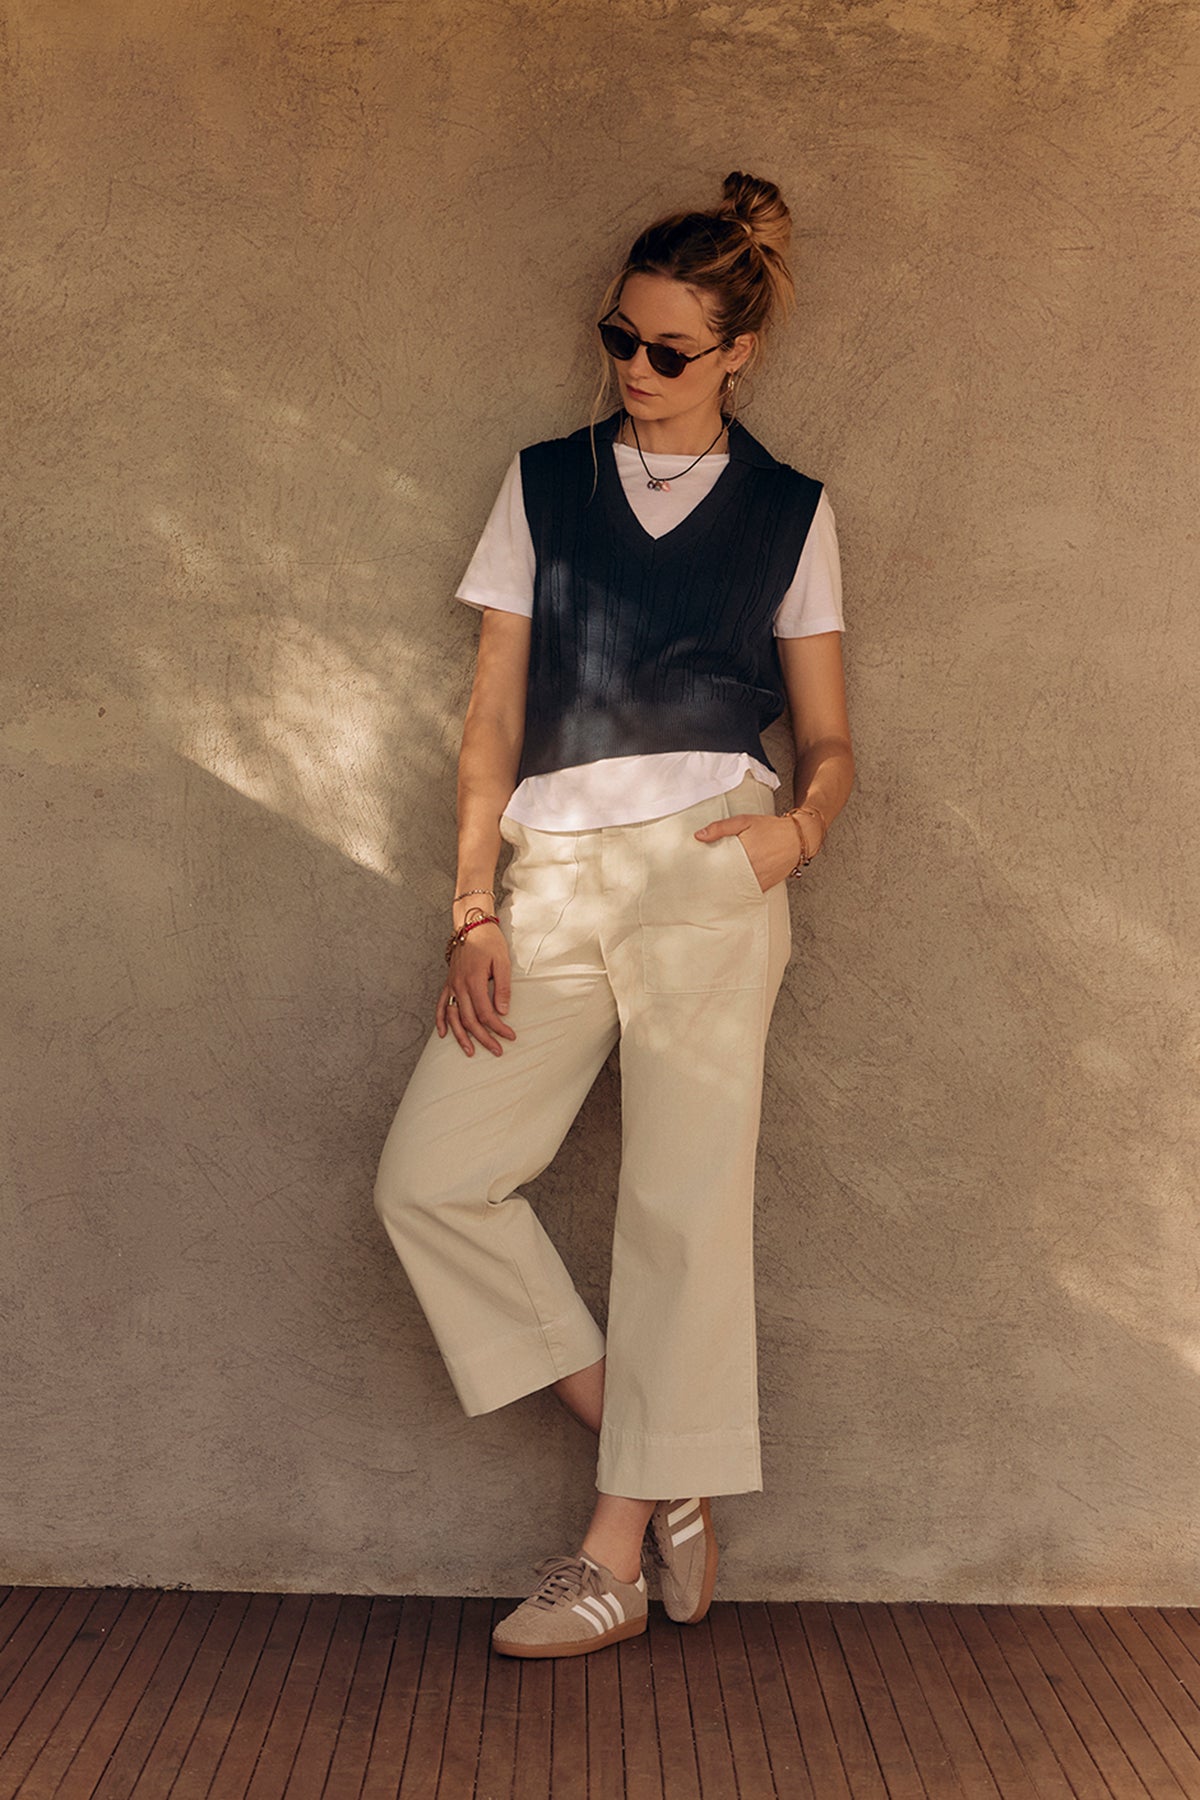   A stylish woman in sunglasses, a black vest, white shirt, and Velvet by Graham & Spencer MYA COTTON CANVAS PANT leans against a beige wall, hands in pockets. 